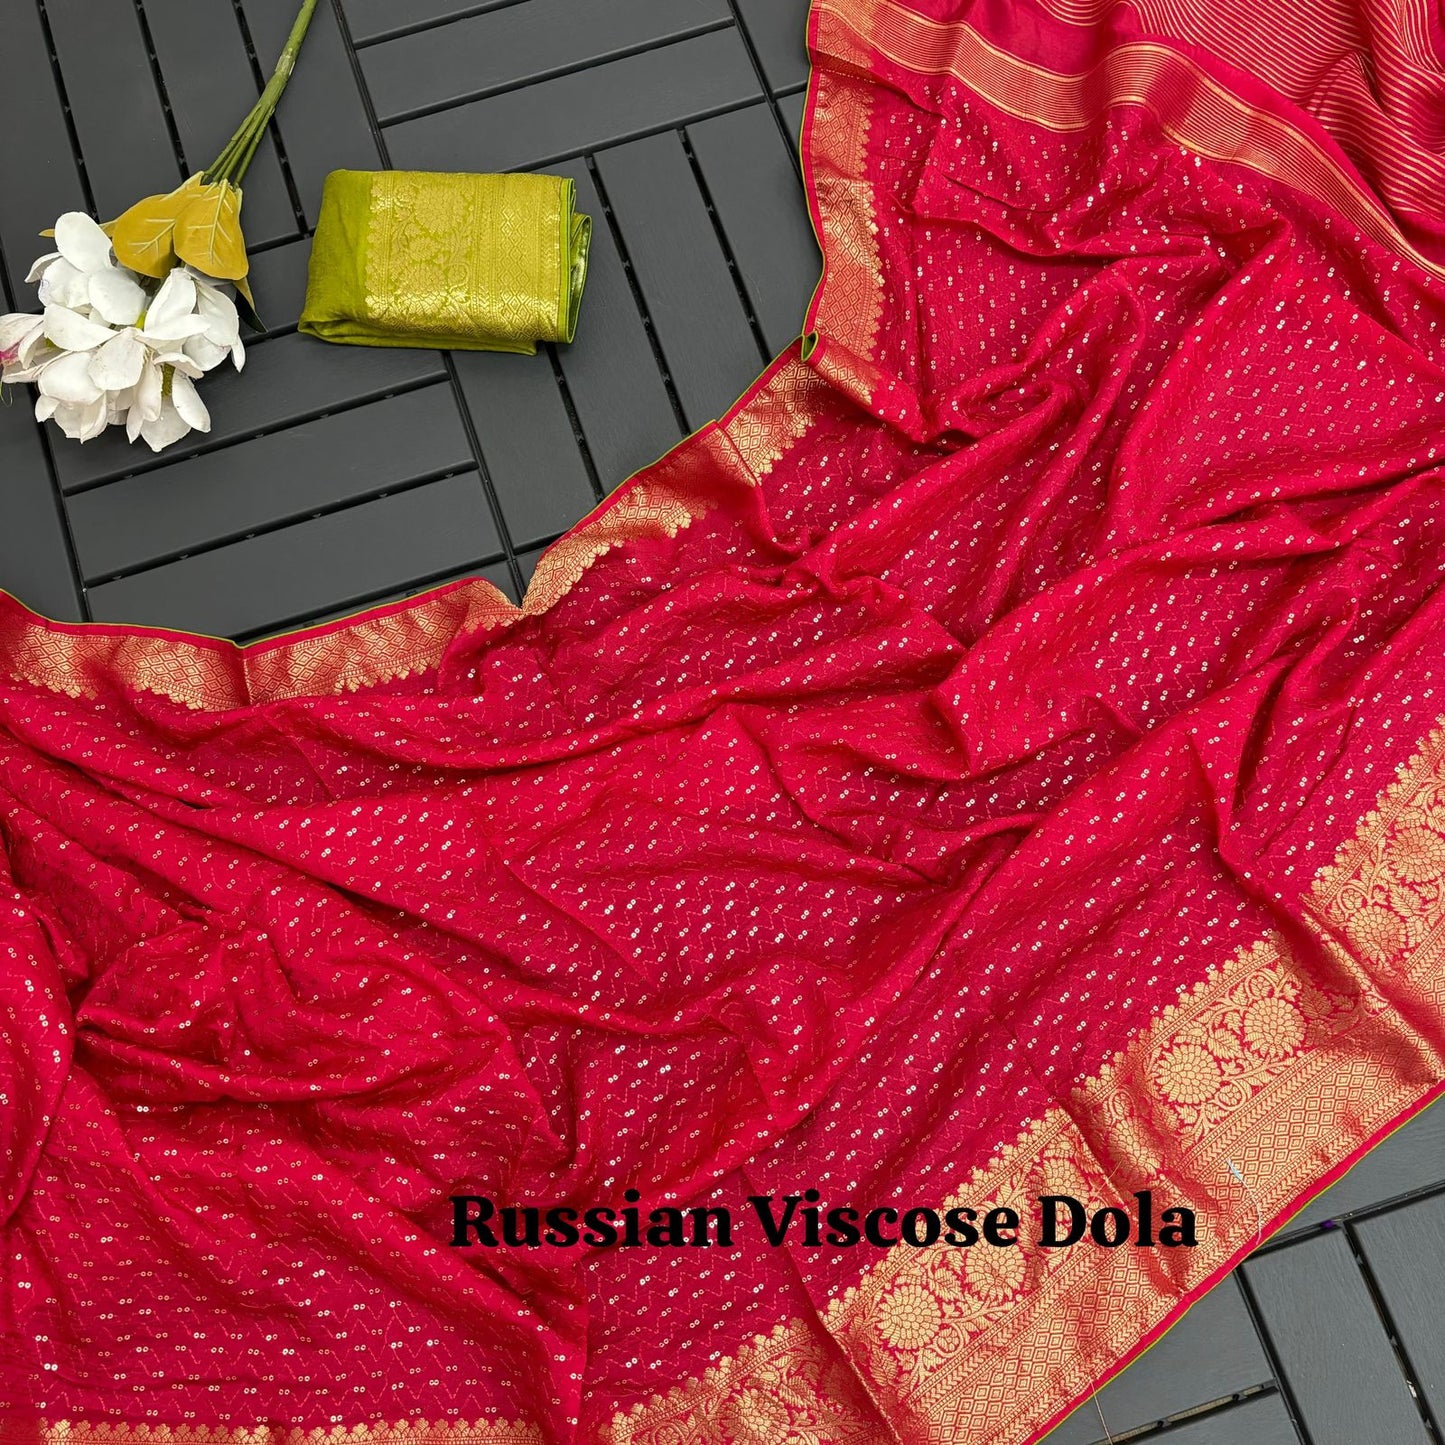 Pure Red Viscose Russian Dola With Jacquard Border Sequence Viscose Thread Embroidery work